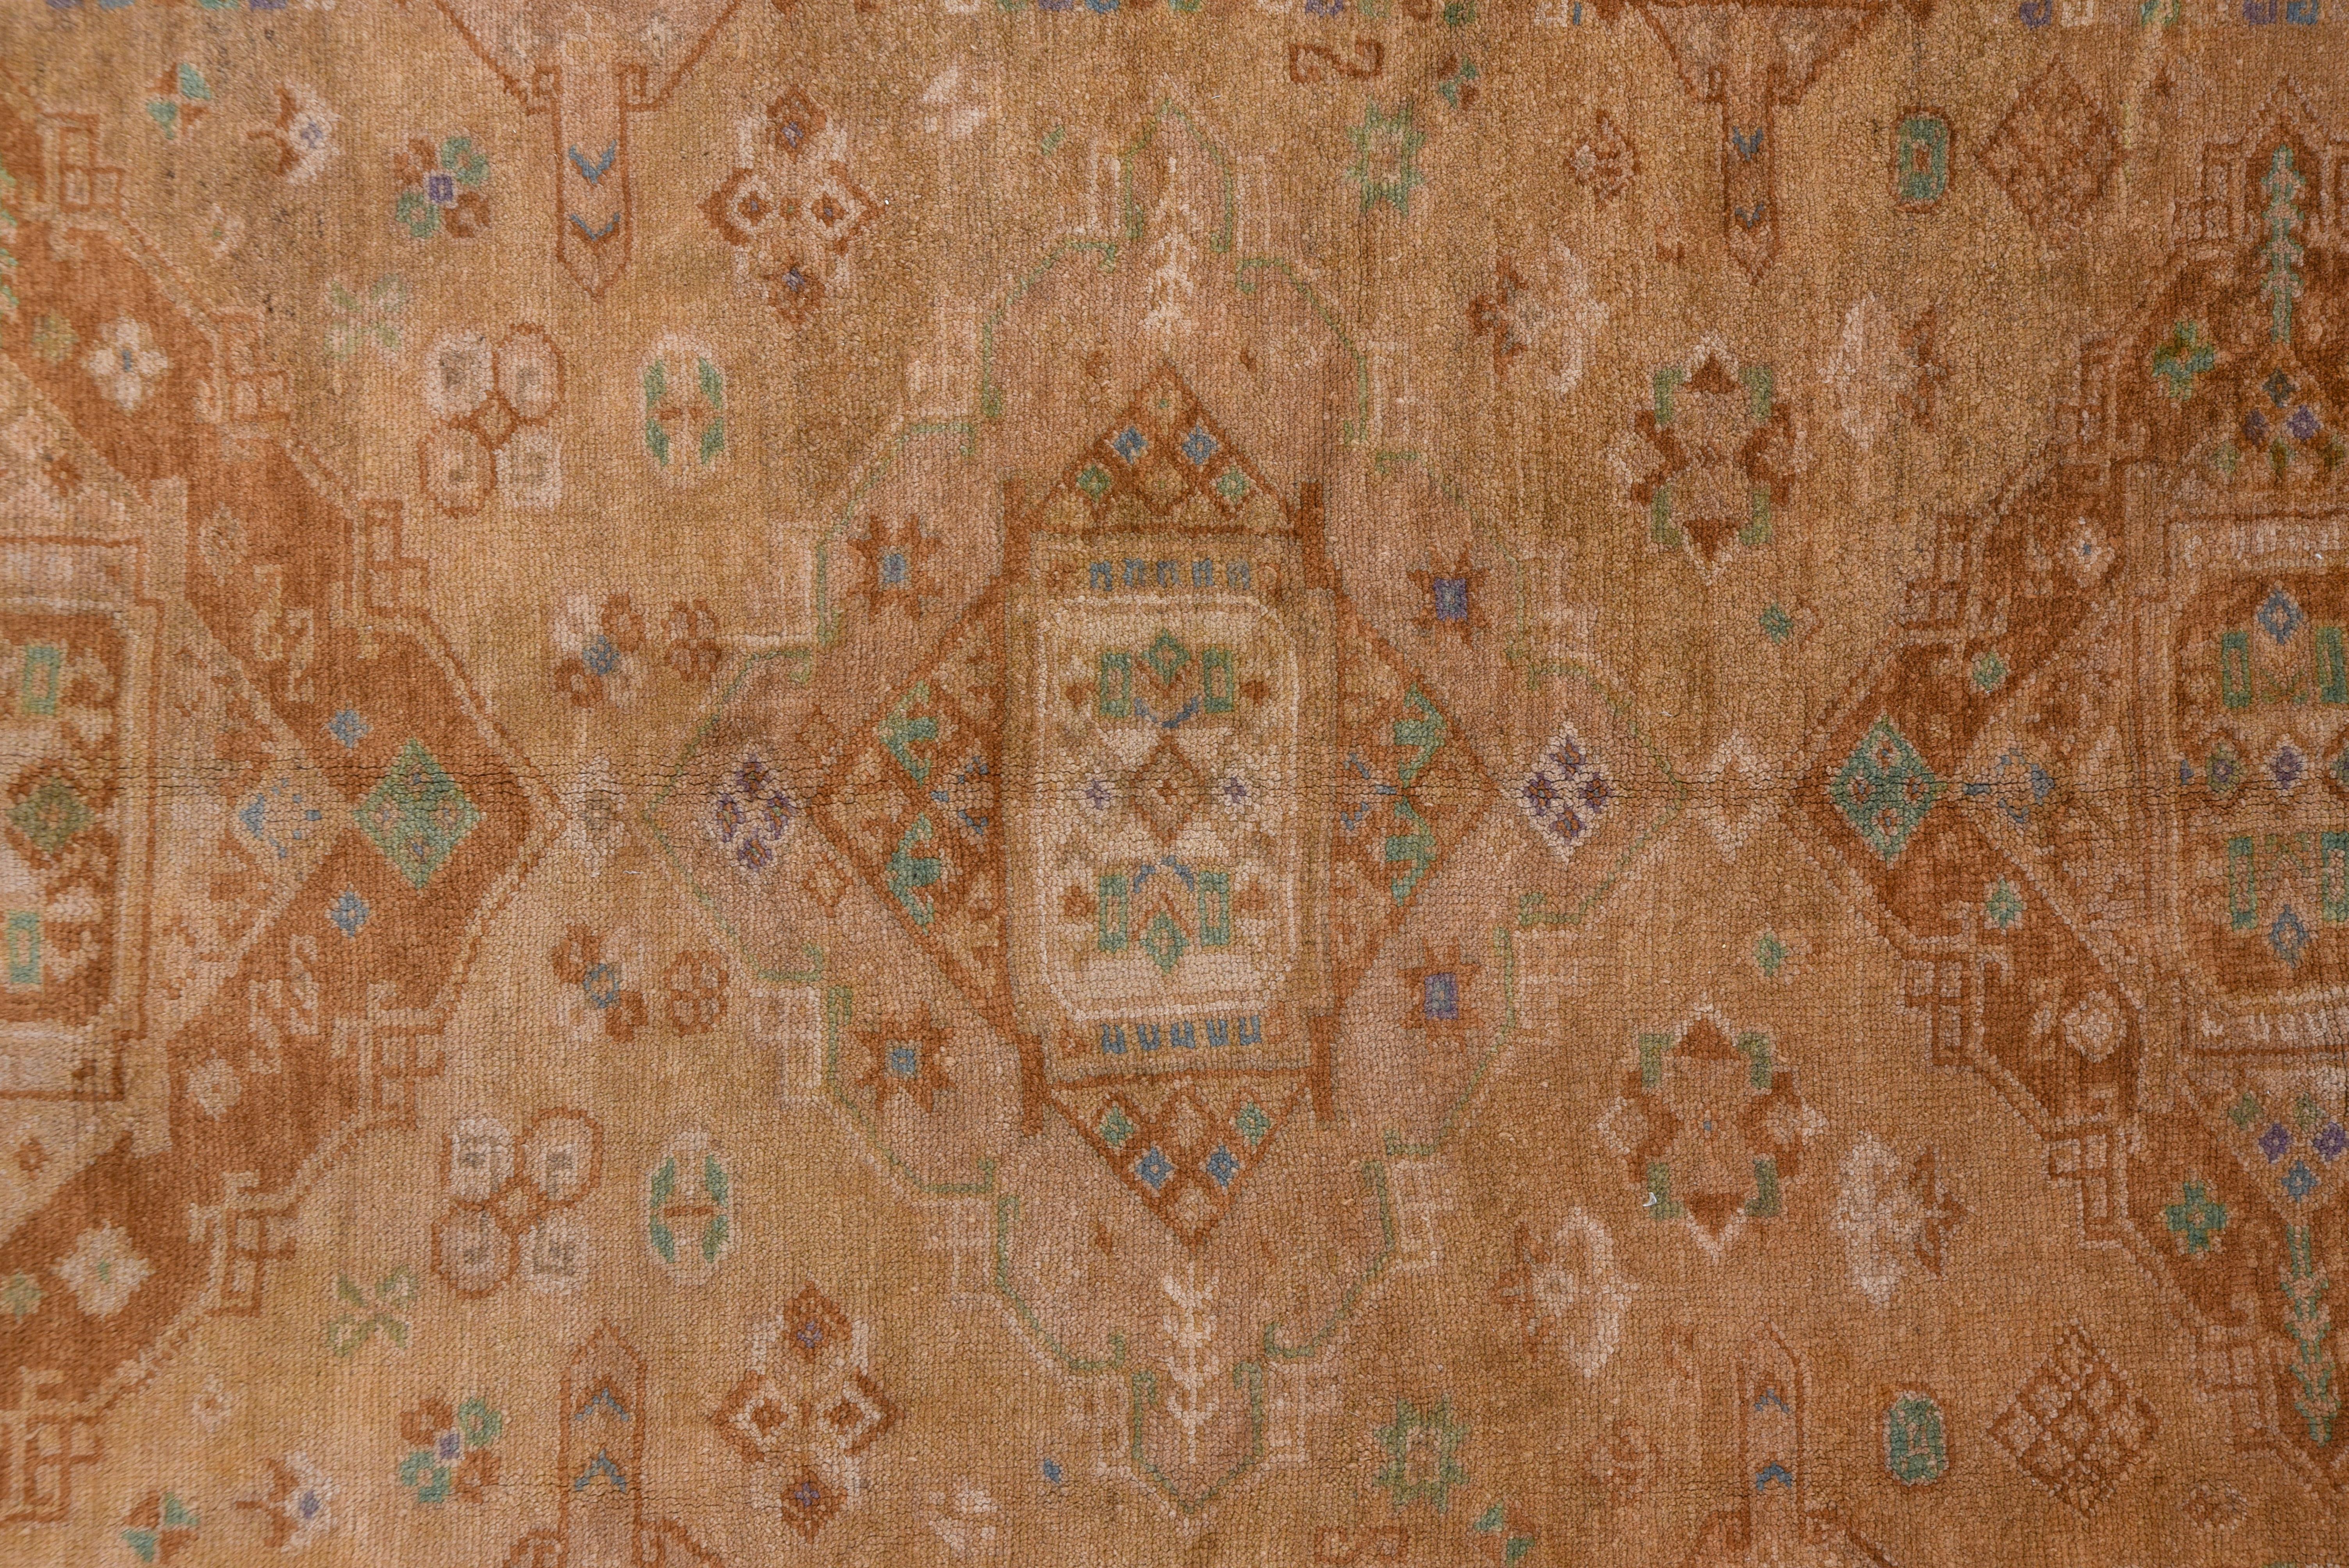 Wool Antique Turkish Oushak Rug, Brown Field, Purple & Green Accents, Sumak Style For Sale